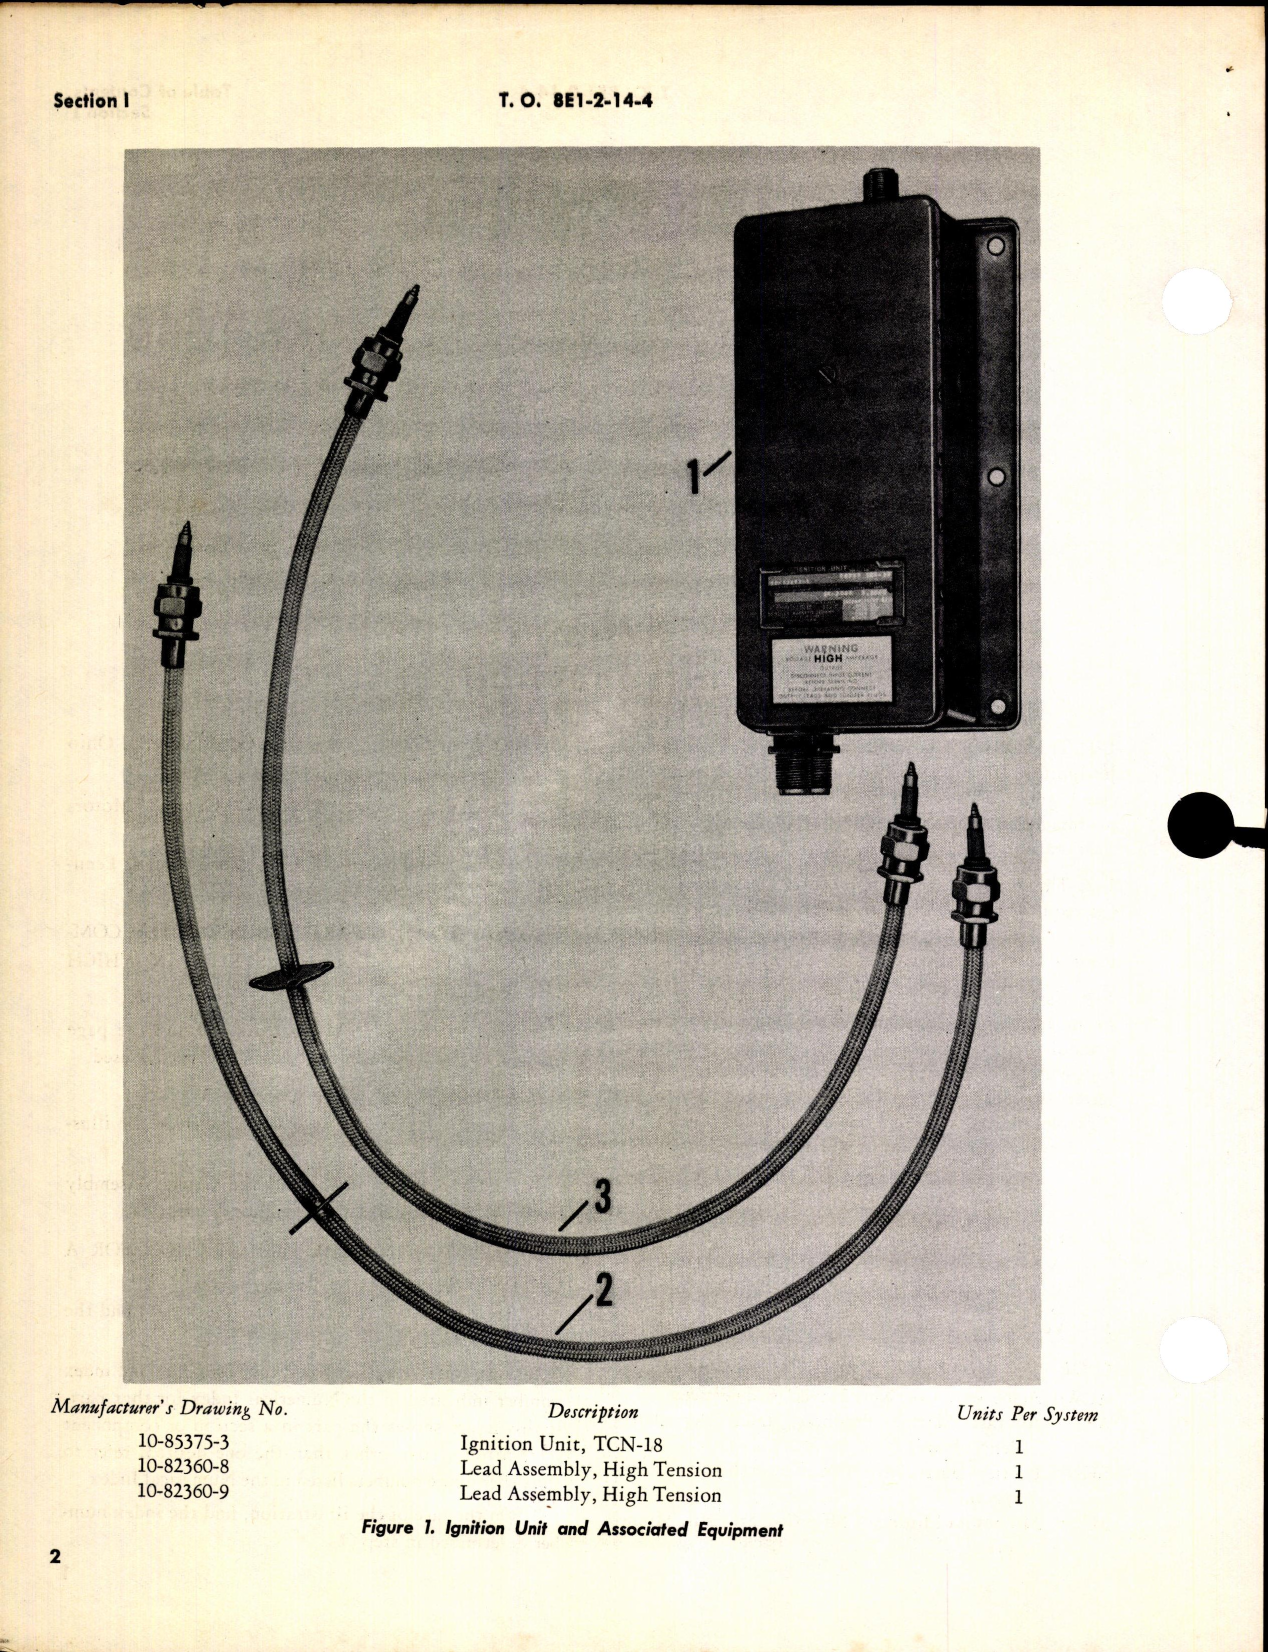 Sample page 4 from AirCorps Library document: Ignition Unit Type TCN-18 & Equipment Used on T-56-A-1 Engine